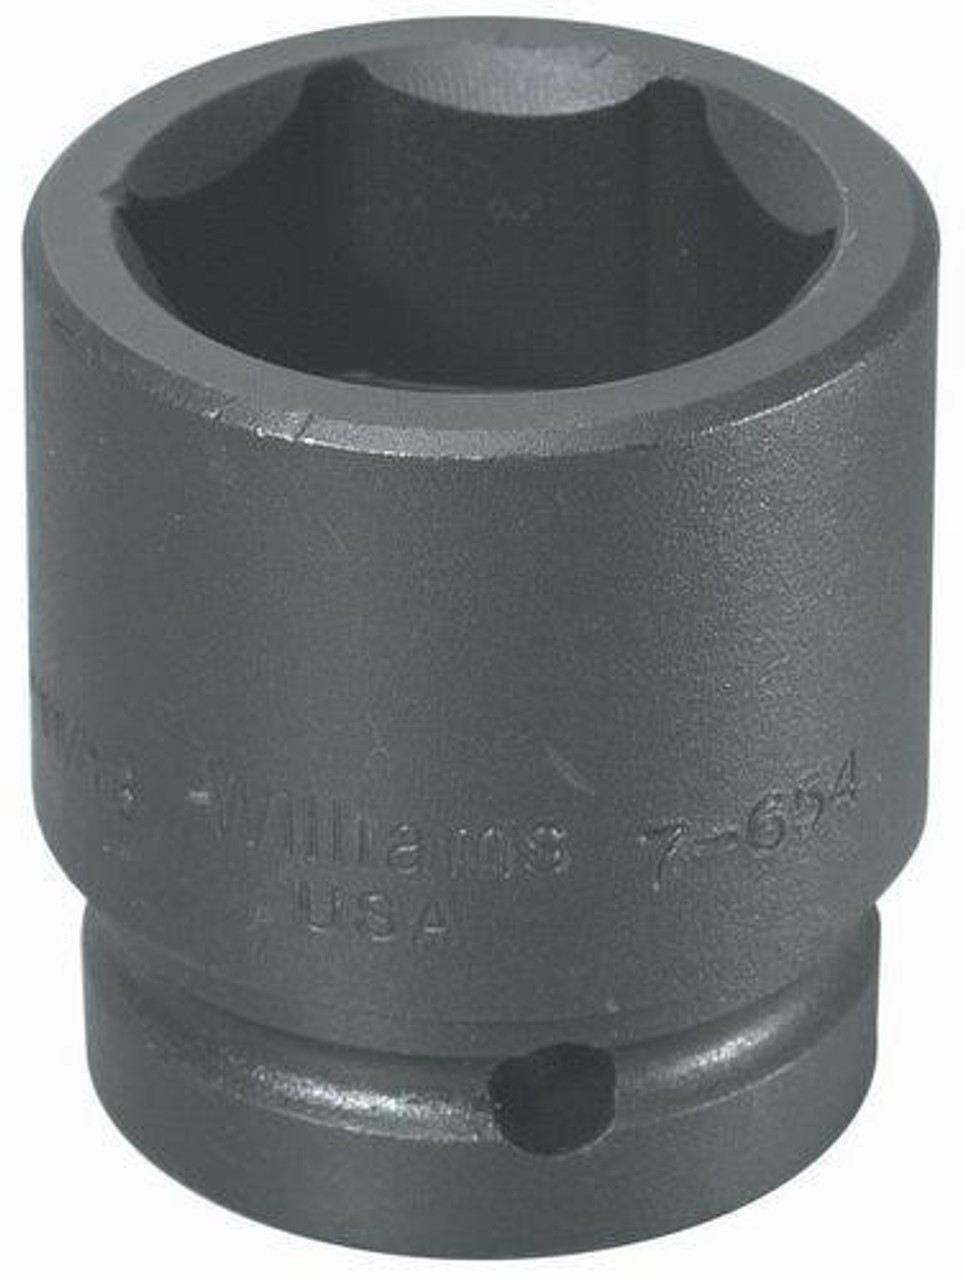 Williams Made In USA 3 5/8" Williams 1" Dr Shallow Impact Socket 6 Pt - 7-6116 